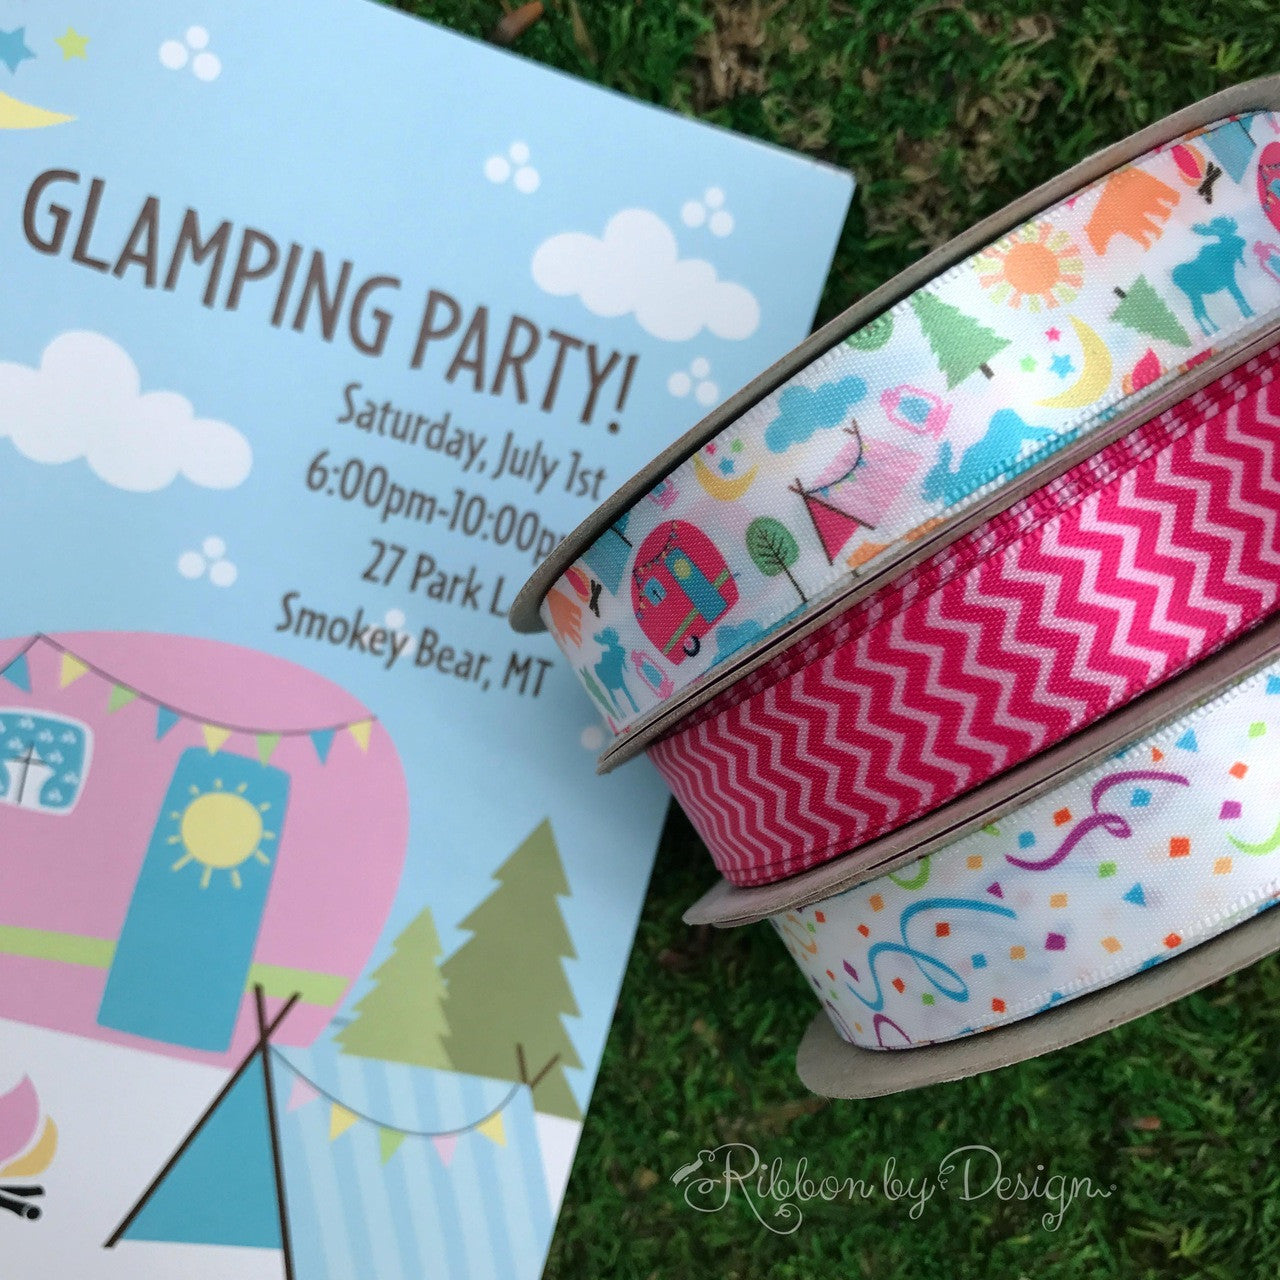 Have a "Glamping" party and add our fun ribbon to the favors to make the evening extra special!